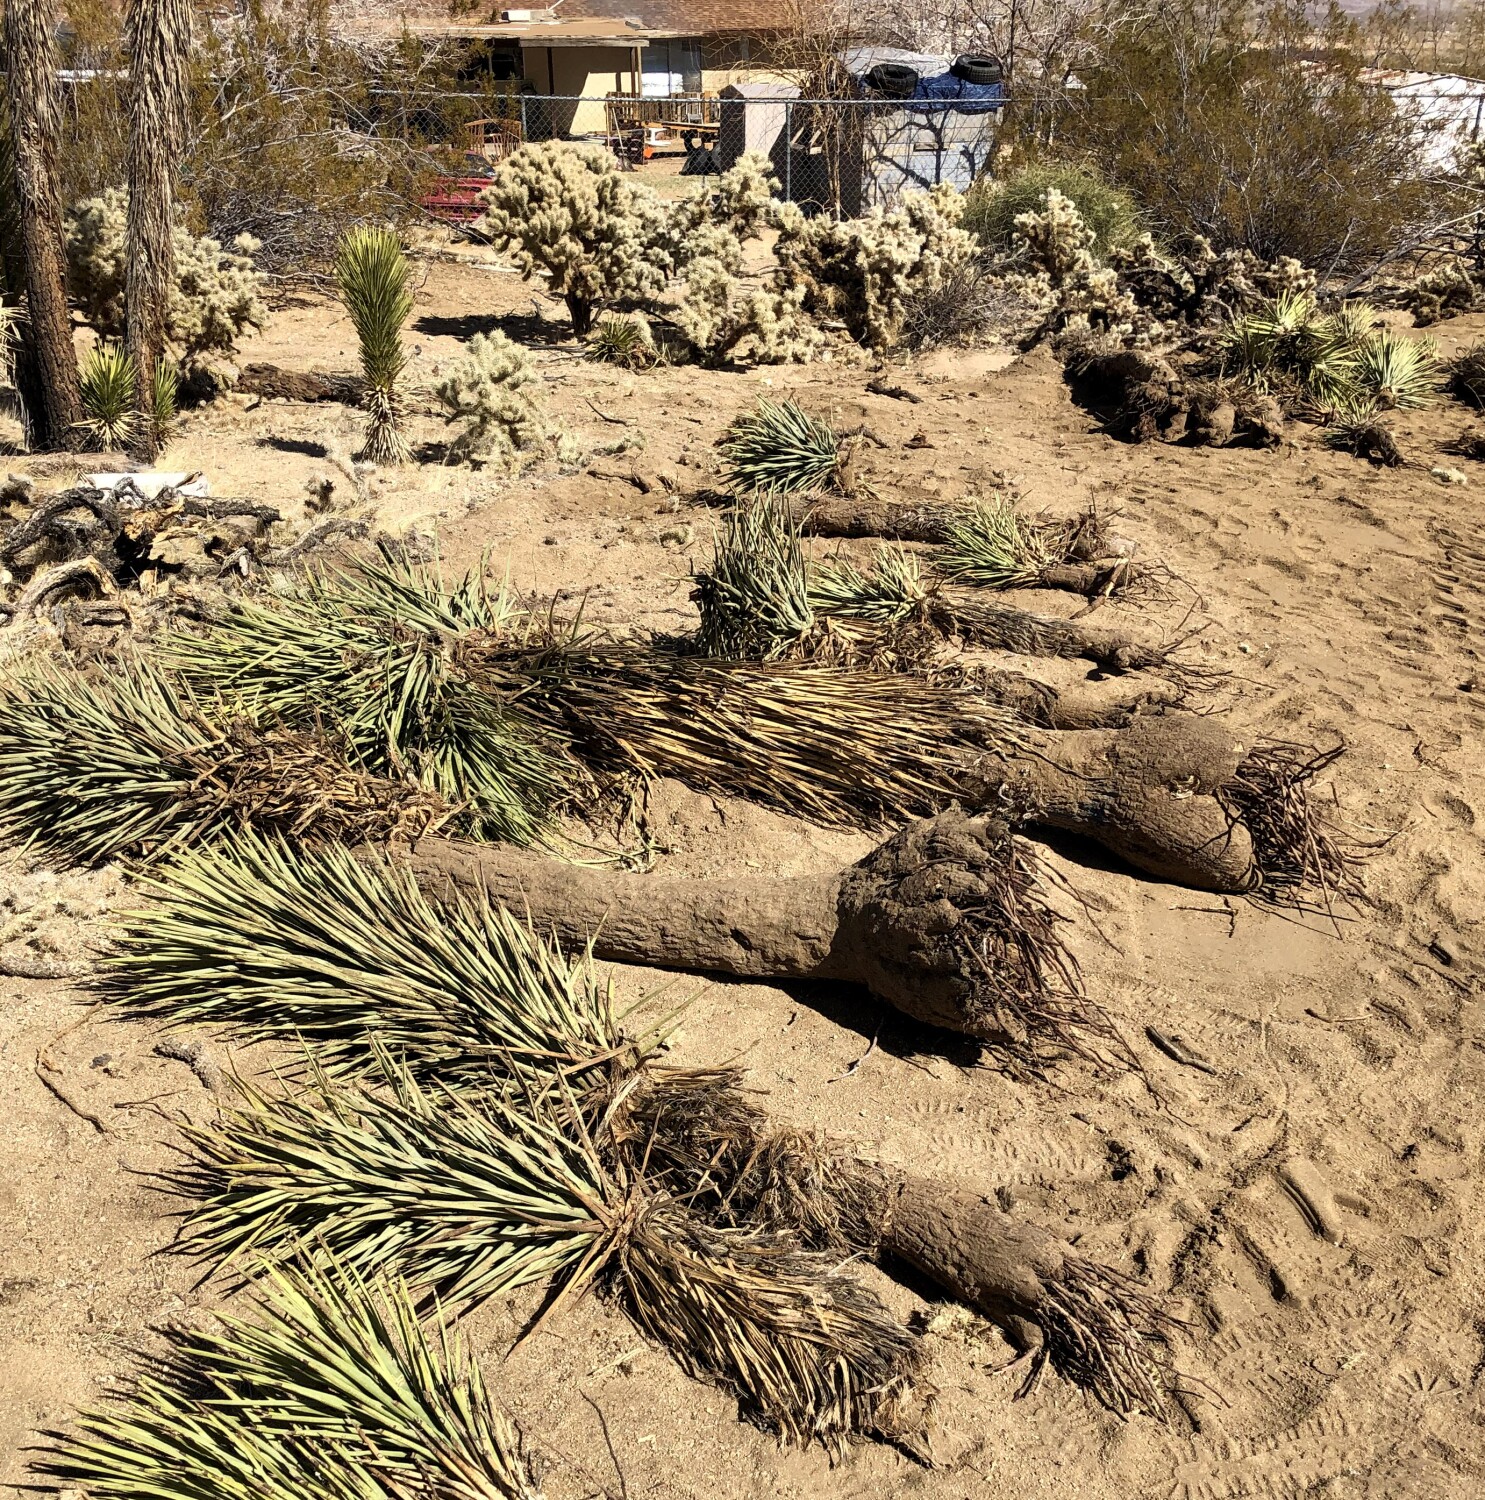 Couple fined $18,000 for bulldozing dozens of Joshua trees to make way for home 